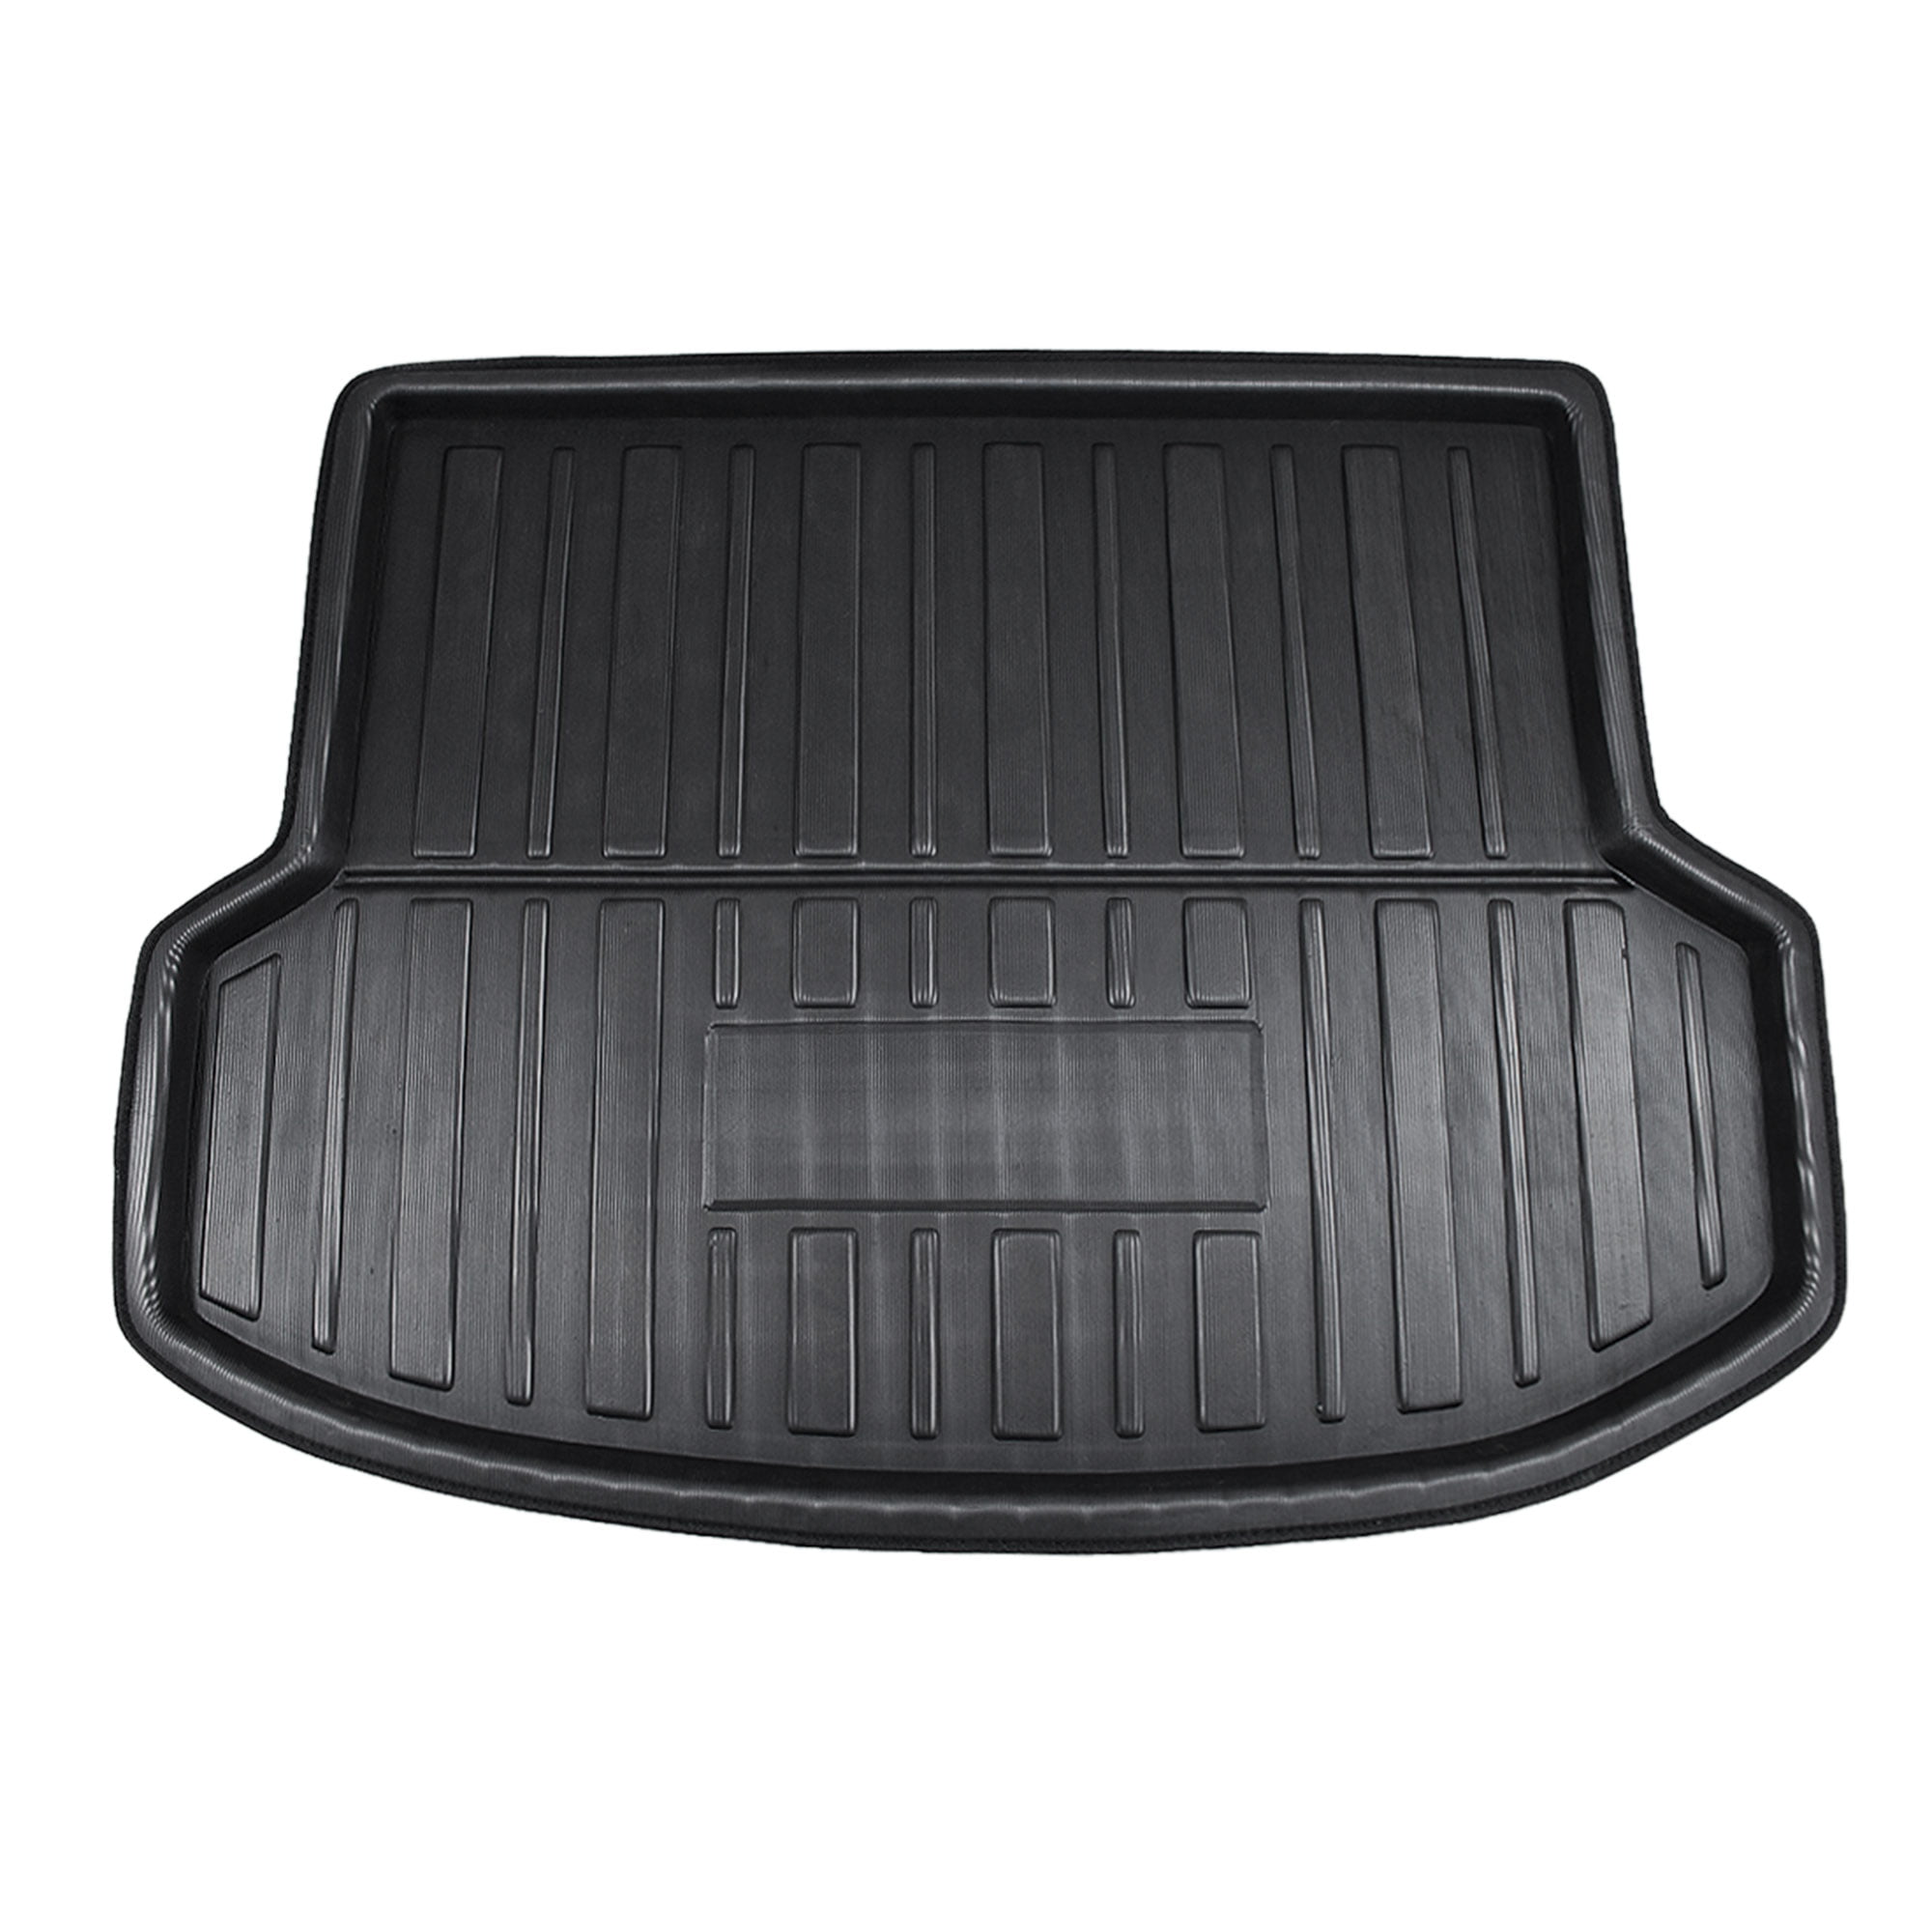 15 on Hyundai Tucson HEAVY DUTY CAR BOOT LINER COVER PROTECTOR MAT